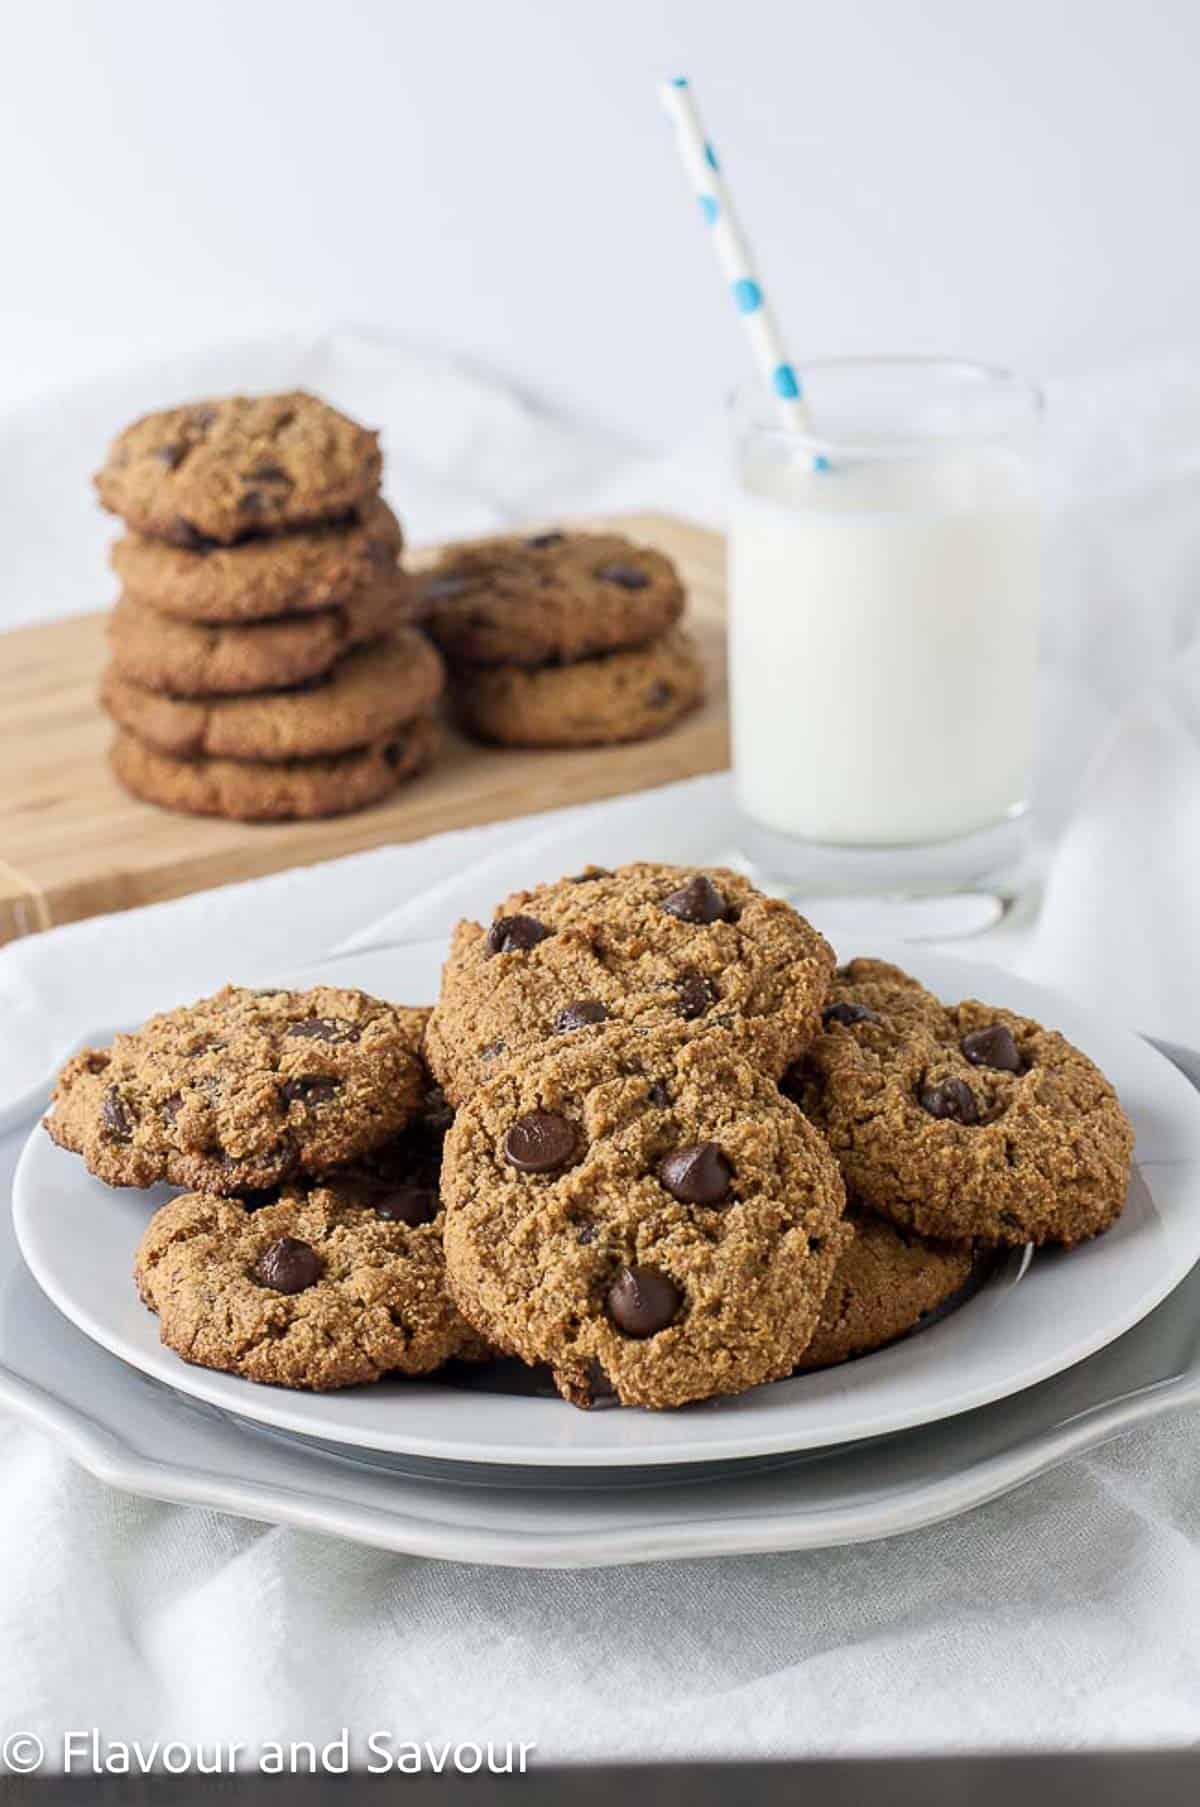 Chocolate chip cookies on a plate with a glass of milk.